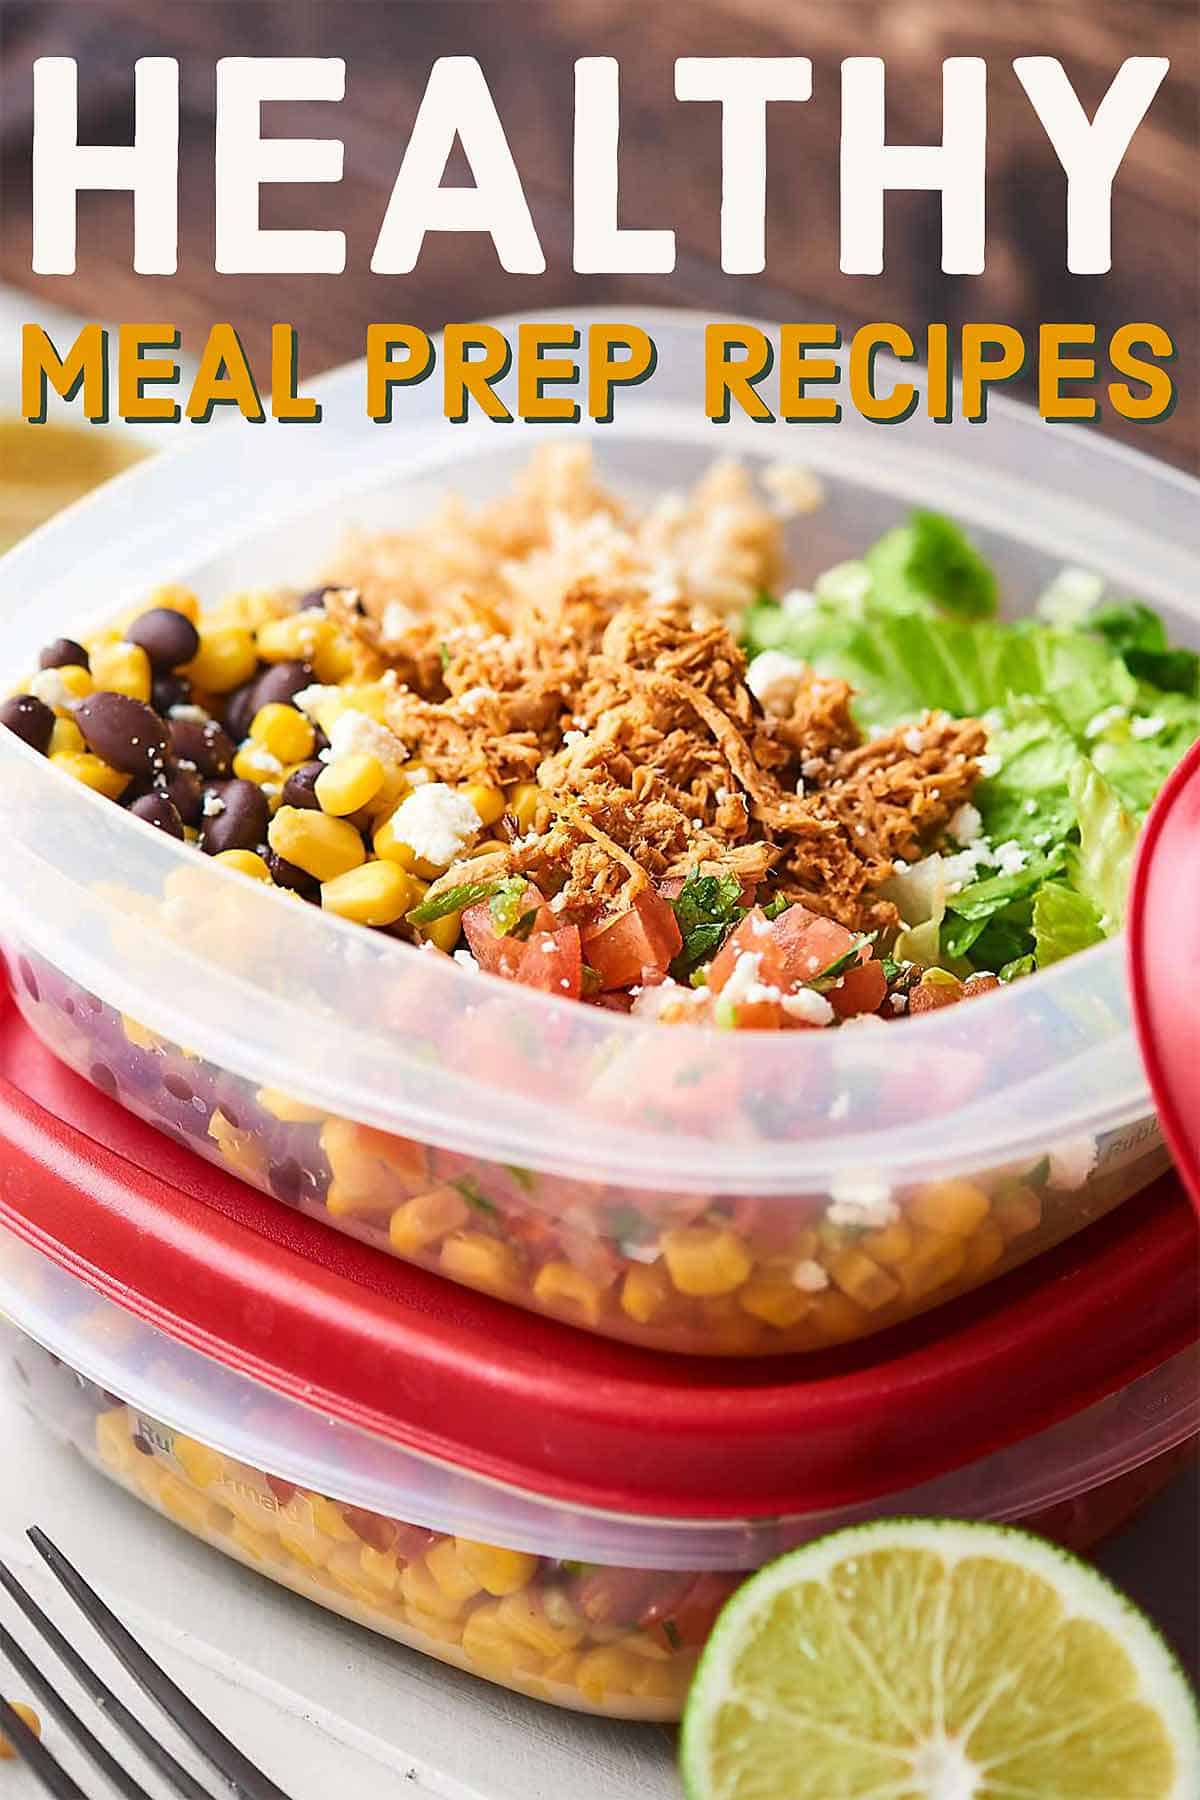 Healthy Meal Prep Recipes 2018. Recipes for breakfast, lunch, snacks, dinner, and desserts that can be made in advance! showmetheyummy.com #healthy #mealprep